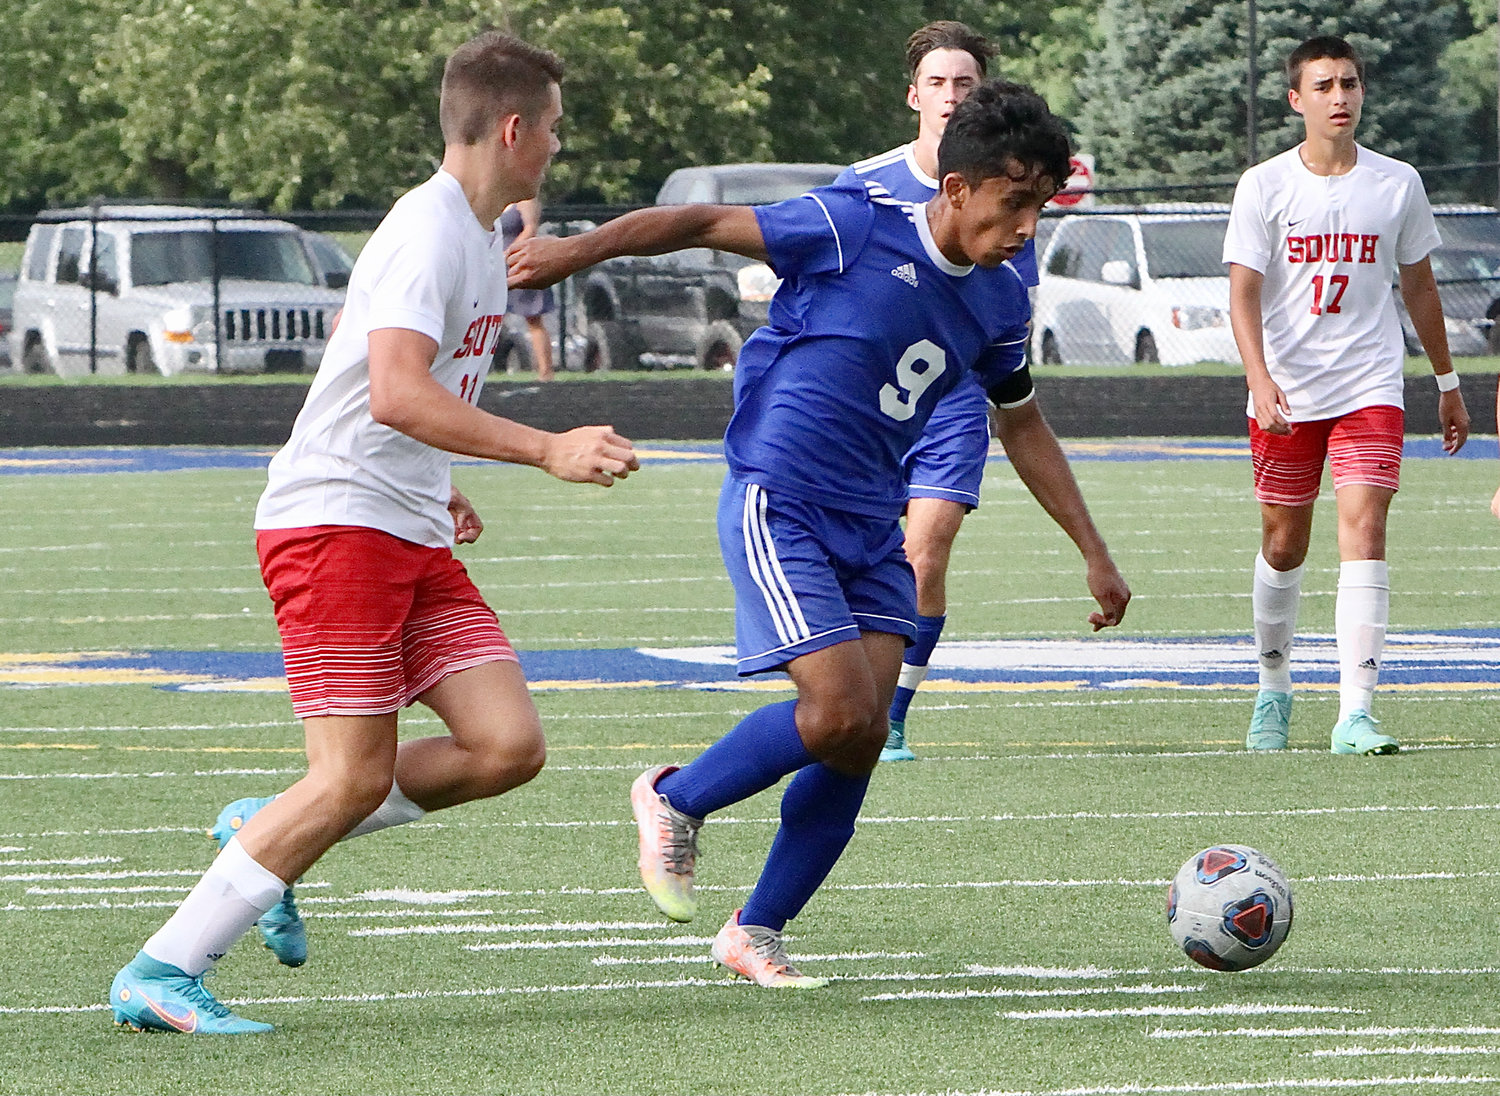 Junior Patrick Corado scores four goals for the Athenians in their 10-0 win over county rival Southmont on Thursday.